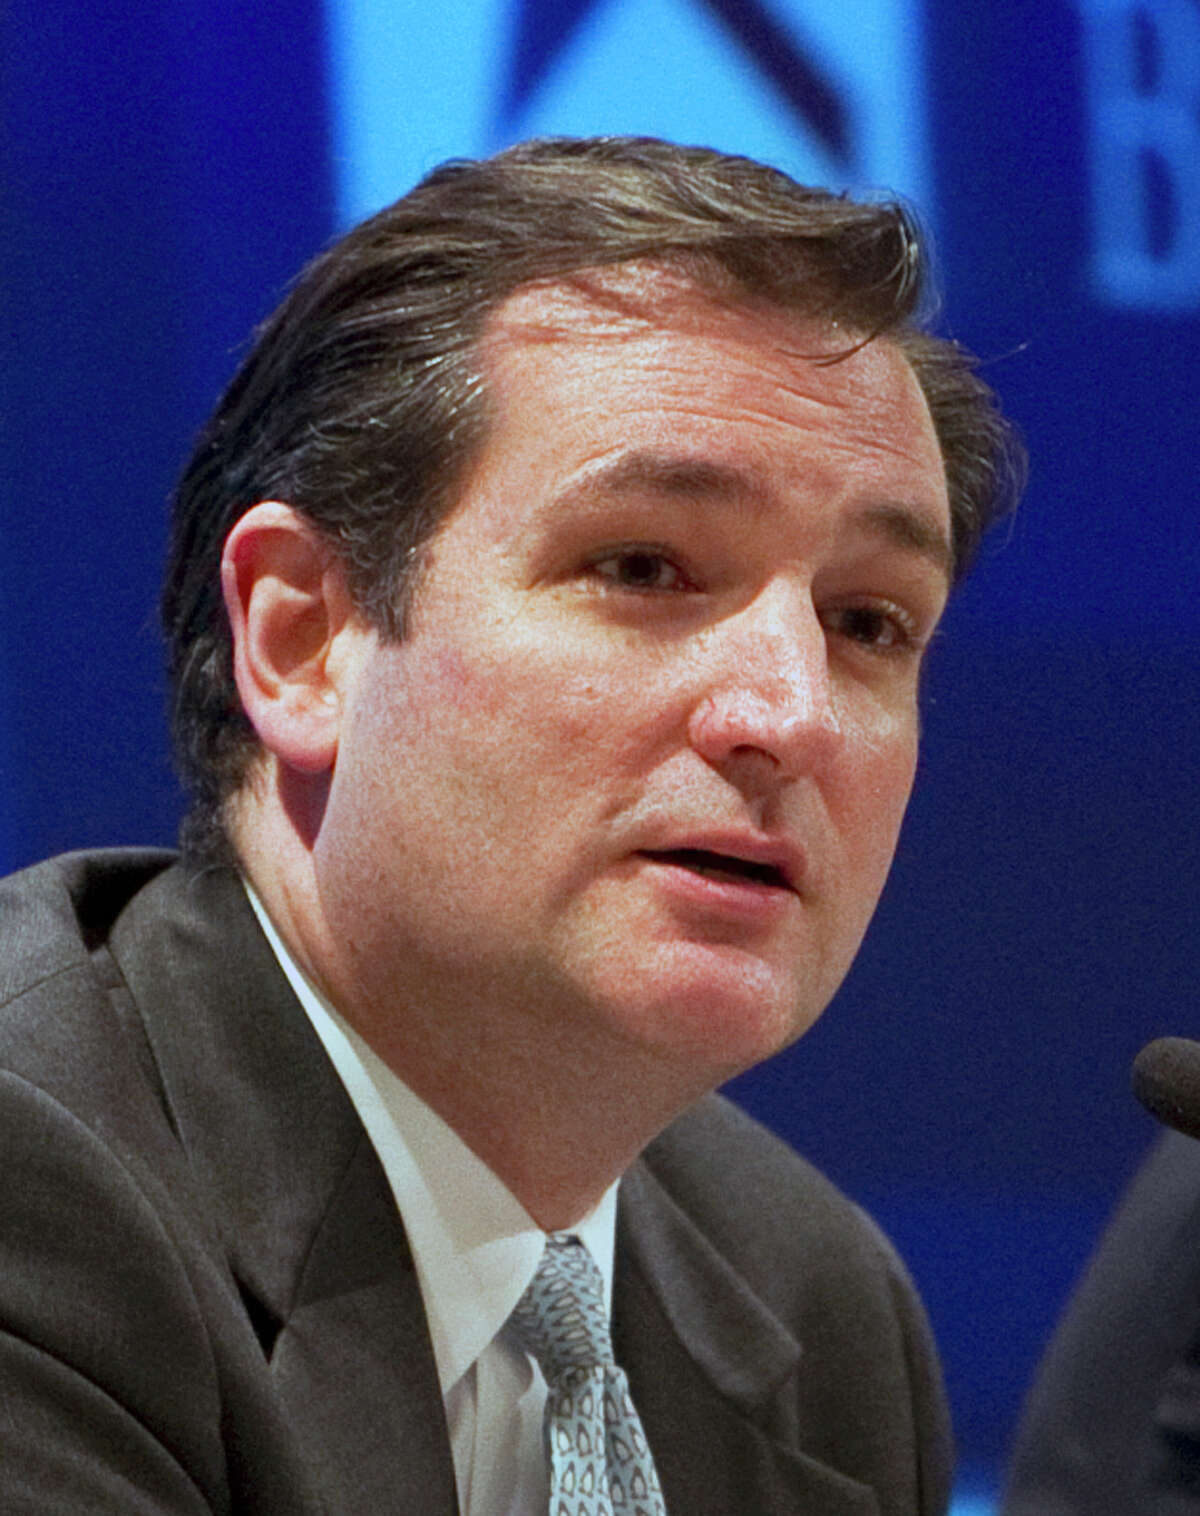 Ted Cruz, former Texas Solicitor General, is seen during a Feb. 1, 2012 debate at the Texas Association of Business 2012 Annual Conference at the AT&T Conference, in Austin, Texas. In many ways, Ted Cruz started preparing for a U.S. Senate race almost 30 years ago, and for many Texas Republicans, he’s the candidate they’ve sought after for almost as long. (AP Photo/Austin American-Statesman, Deborah Cannon) MAGS OUT; NO SALES; INTERNET AND TV MUST CREDIT PHOTOGRAPHER AND STATESMAN.COM